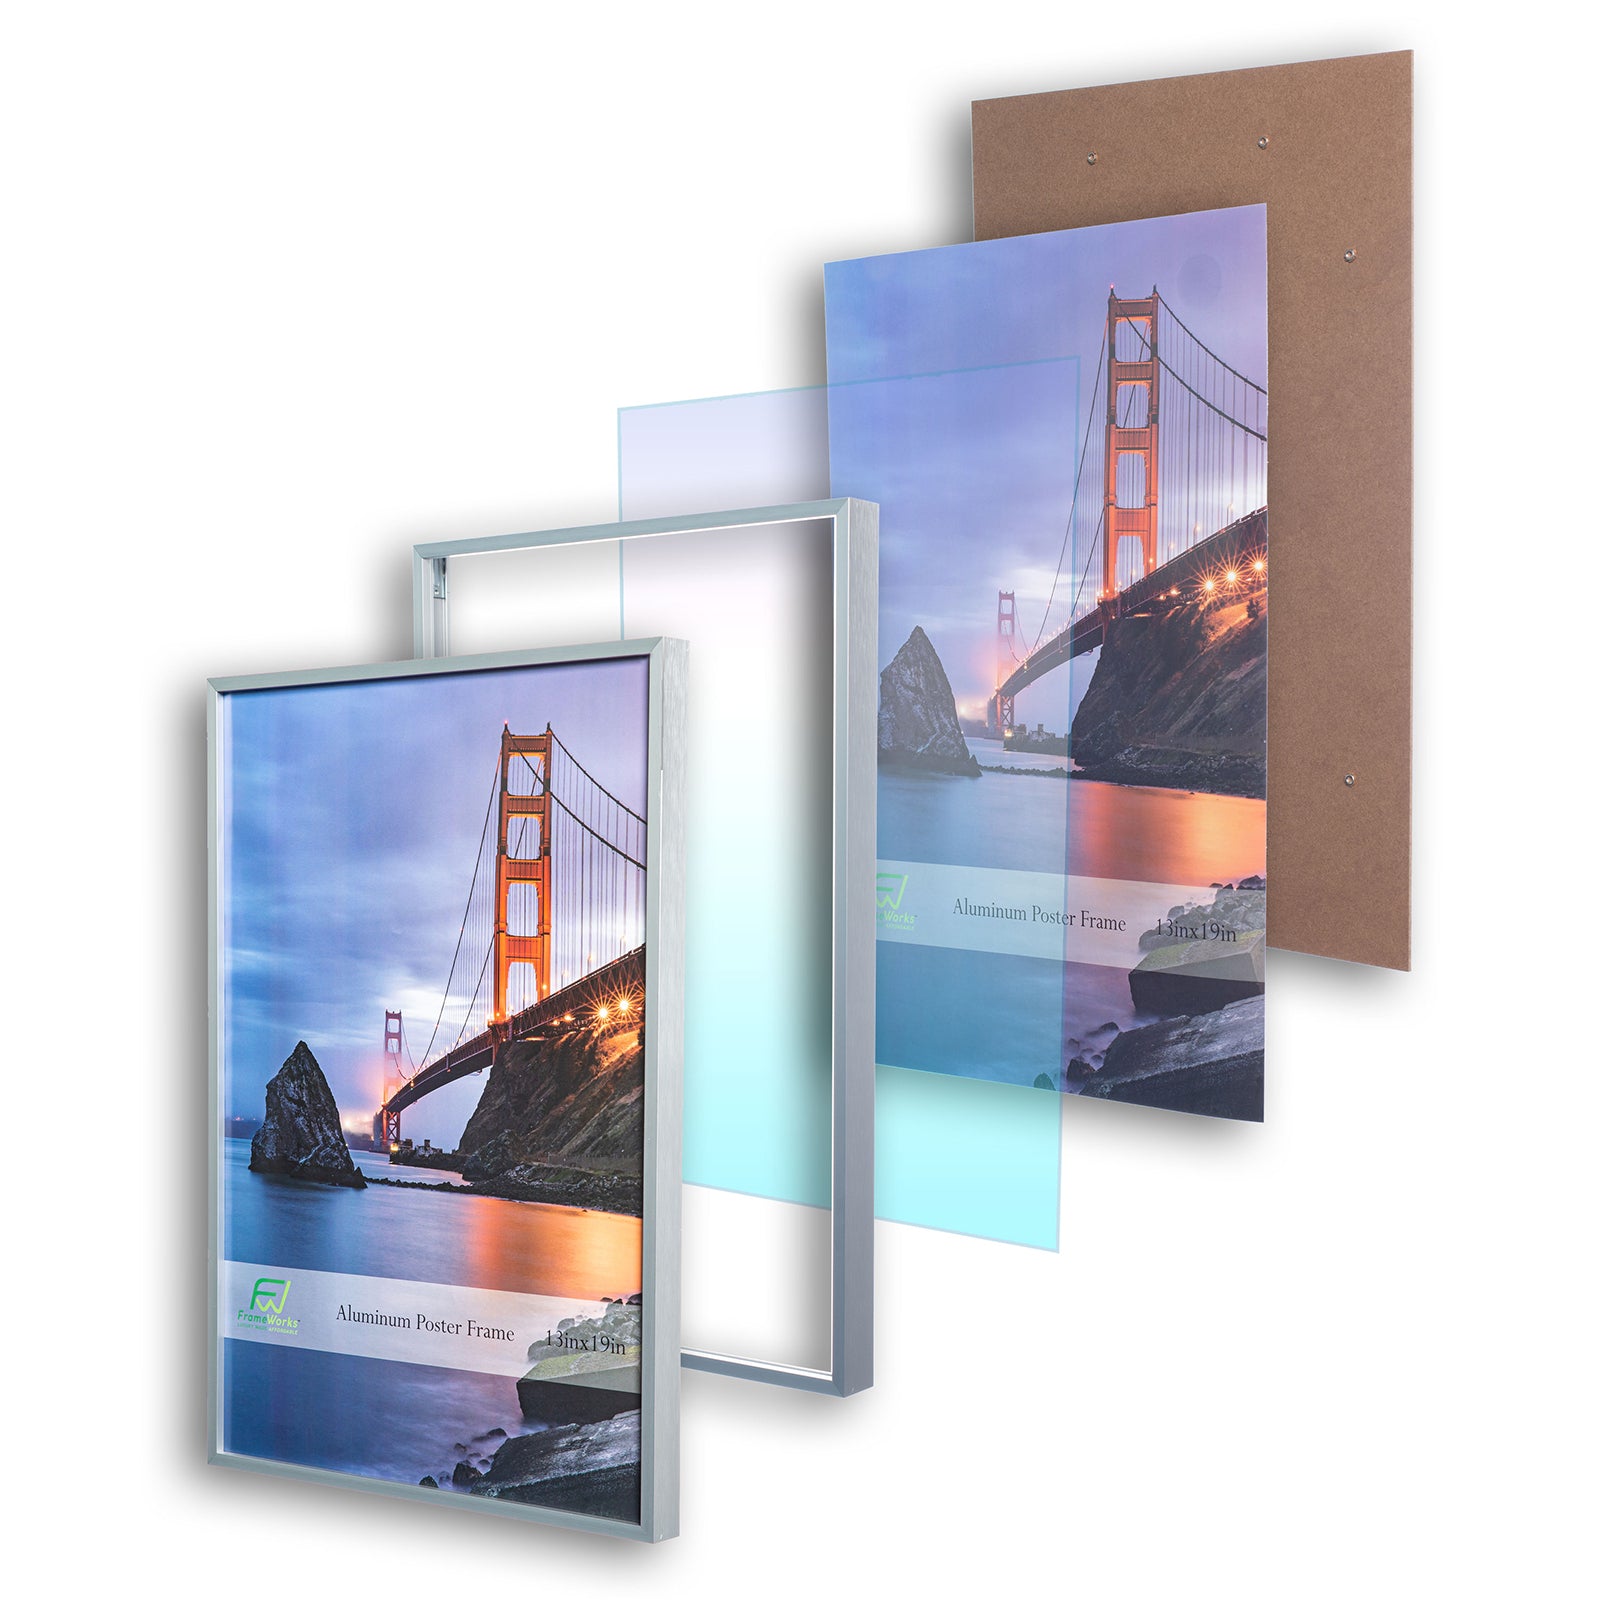 8 x 8 Deluxe Silver Aluminum Contemporary Picture Frame, 4 x 4